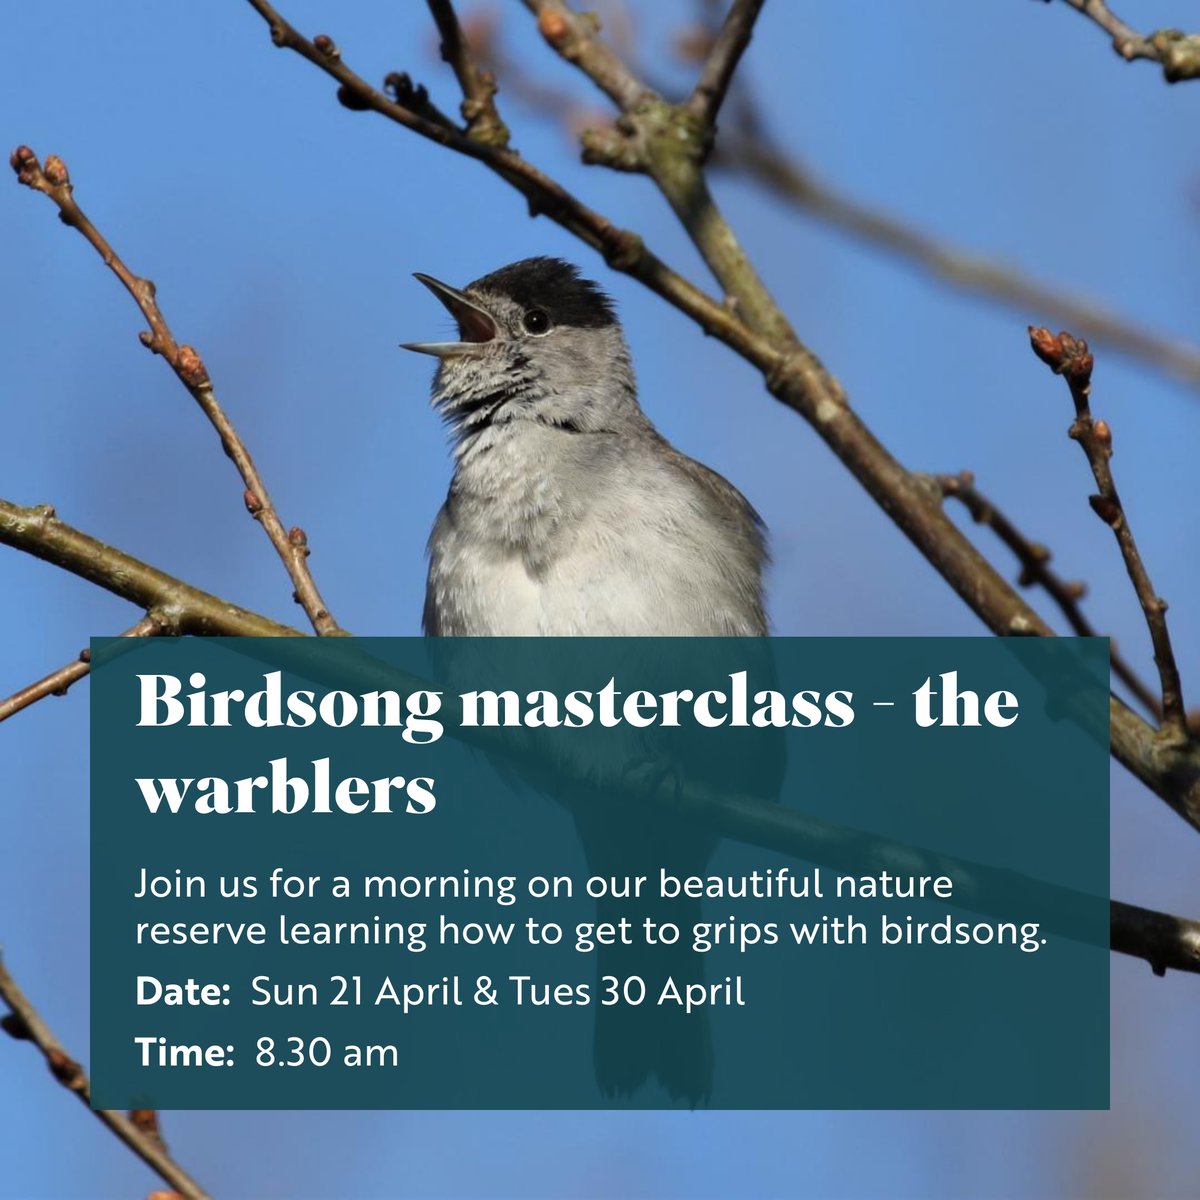 We've had an influx of spring migrants and now you can hear Blackcap, Common Whitethroat, Willow Warbler and Sedge Warbler amongst the choir. If you want to learn how to distinguish the different voices, take a look at our upcoming workshops: events.rspb.org.uk/pulboroughbroo…